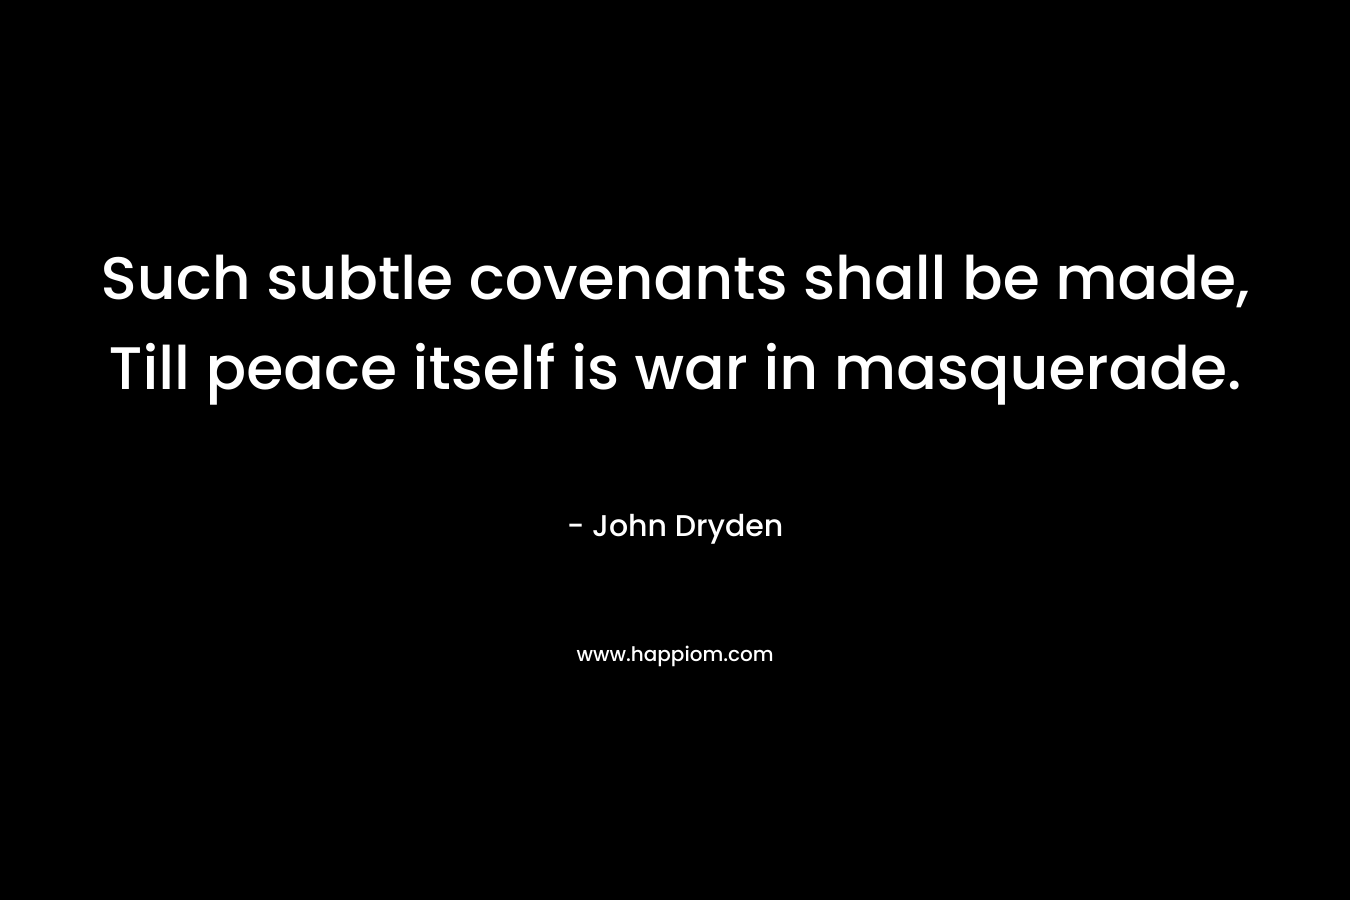 Such subtle covenants shall be made, Till peace itself is war in masquerade. – John Dryden